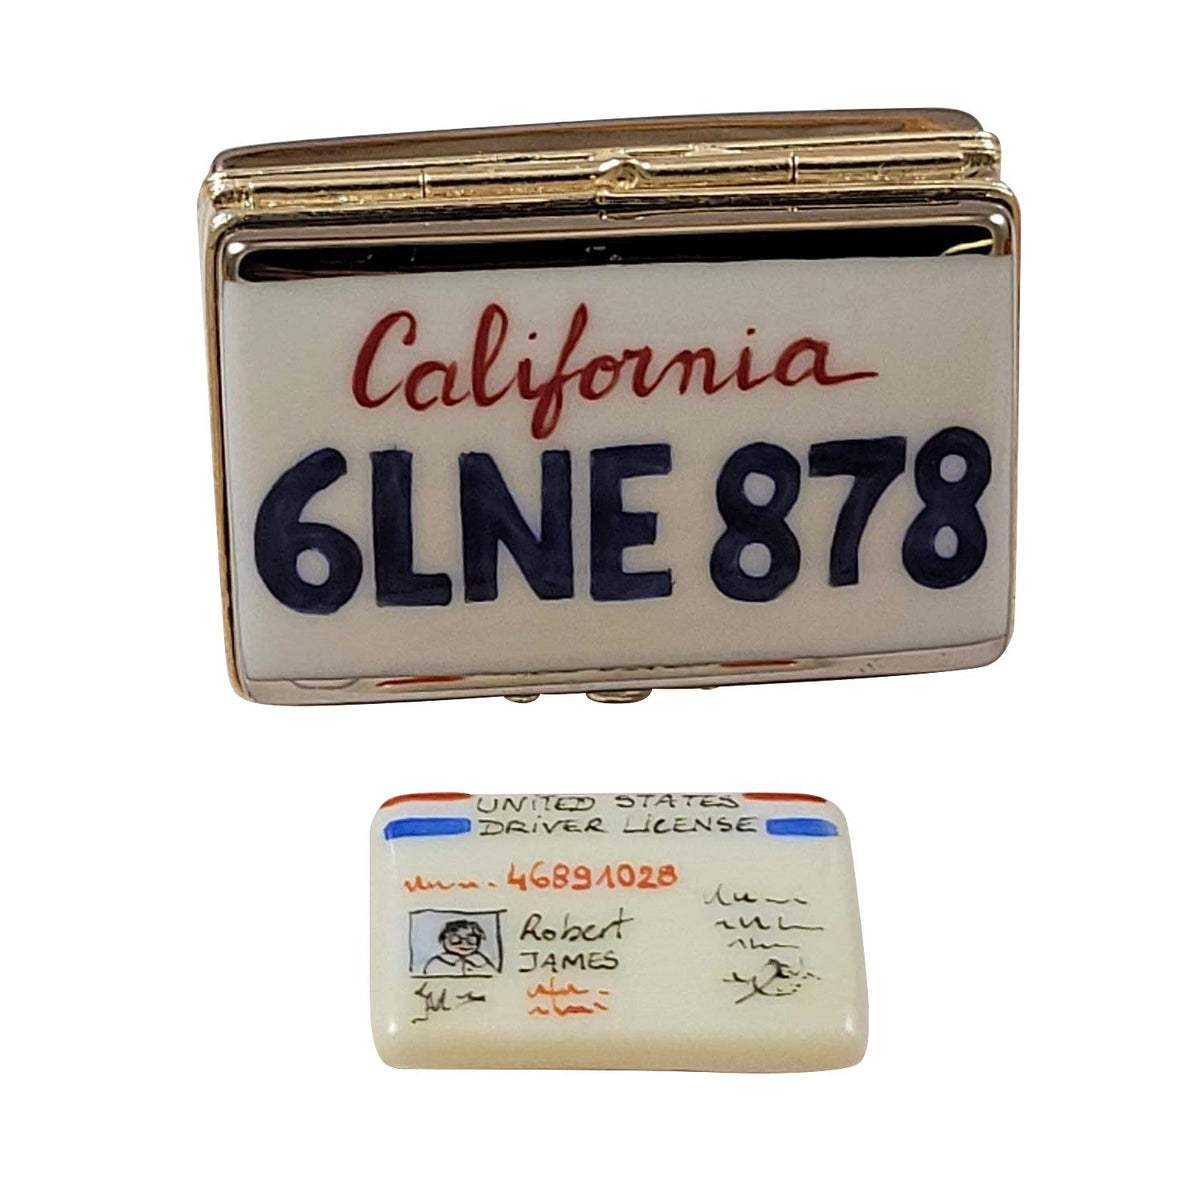 California License Plate with Driver's License